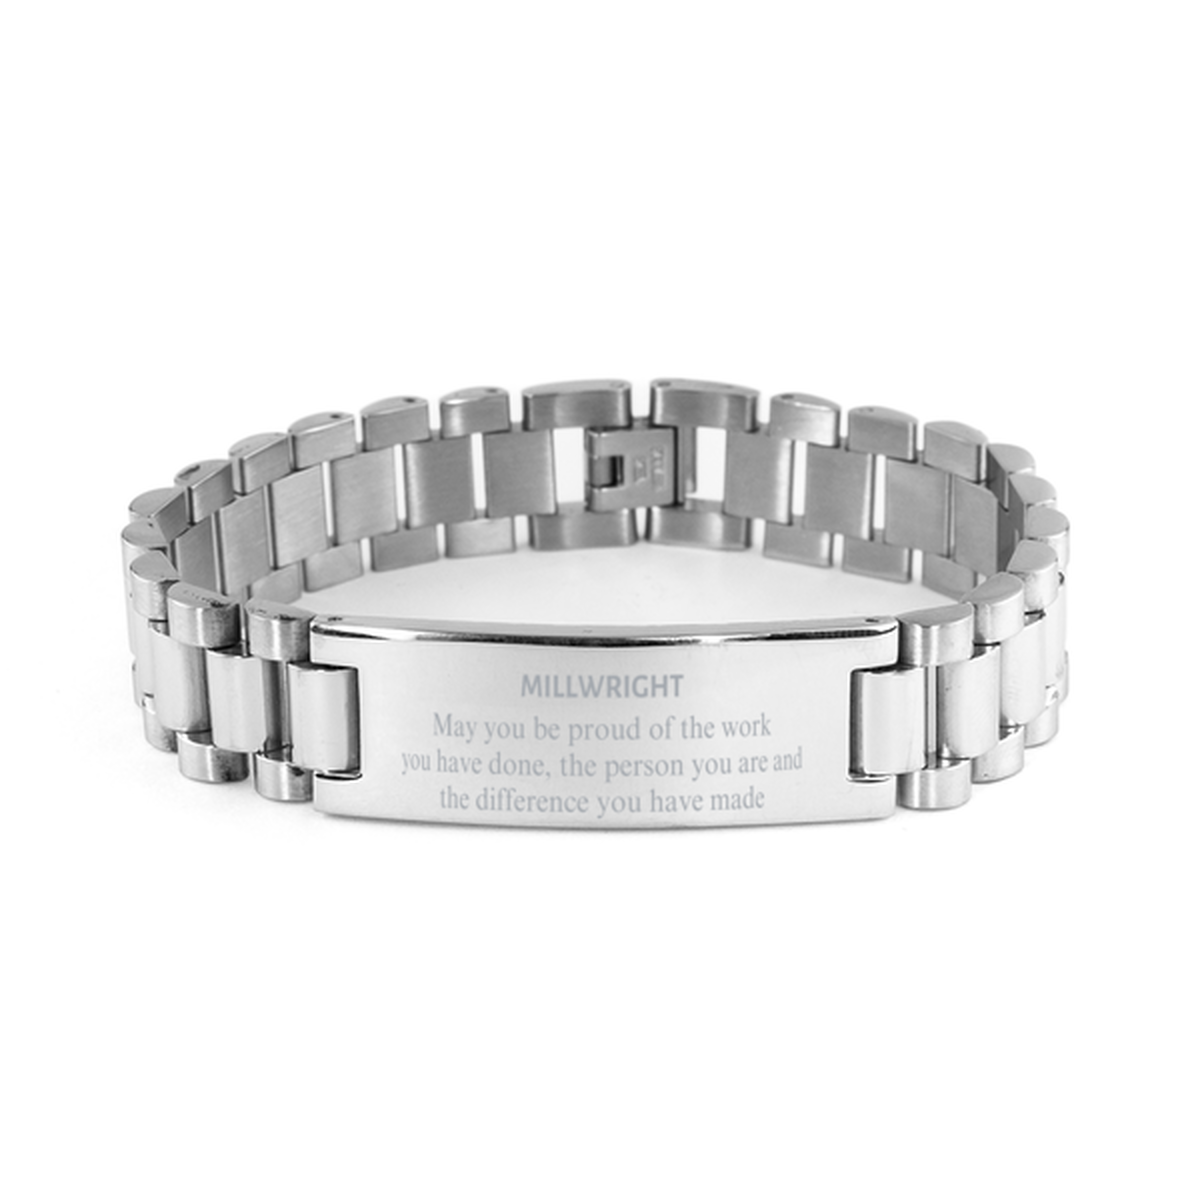 Millwright May you be proud of the work you have done, Retirement Millwright Ladder Stainless Steel Bracelet for Colleague Appreciation Gifts Amazing for Millwright